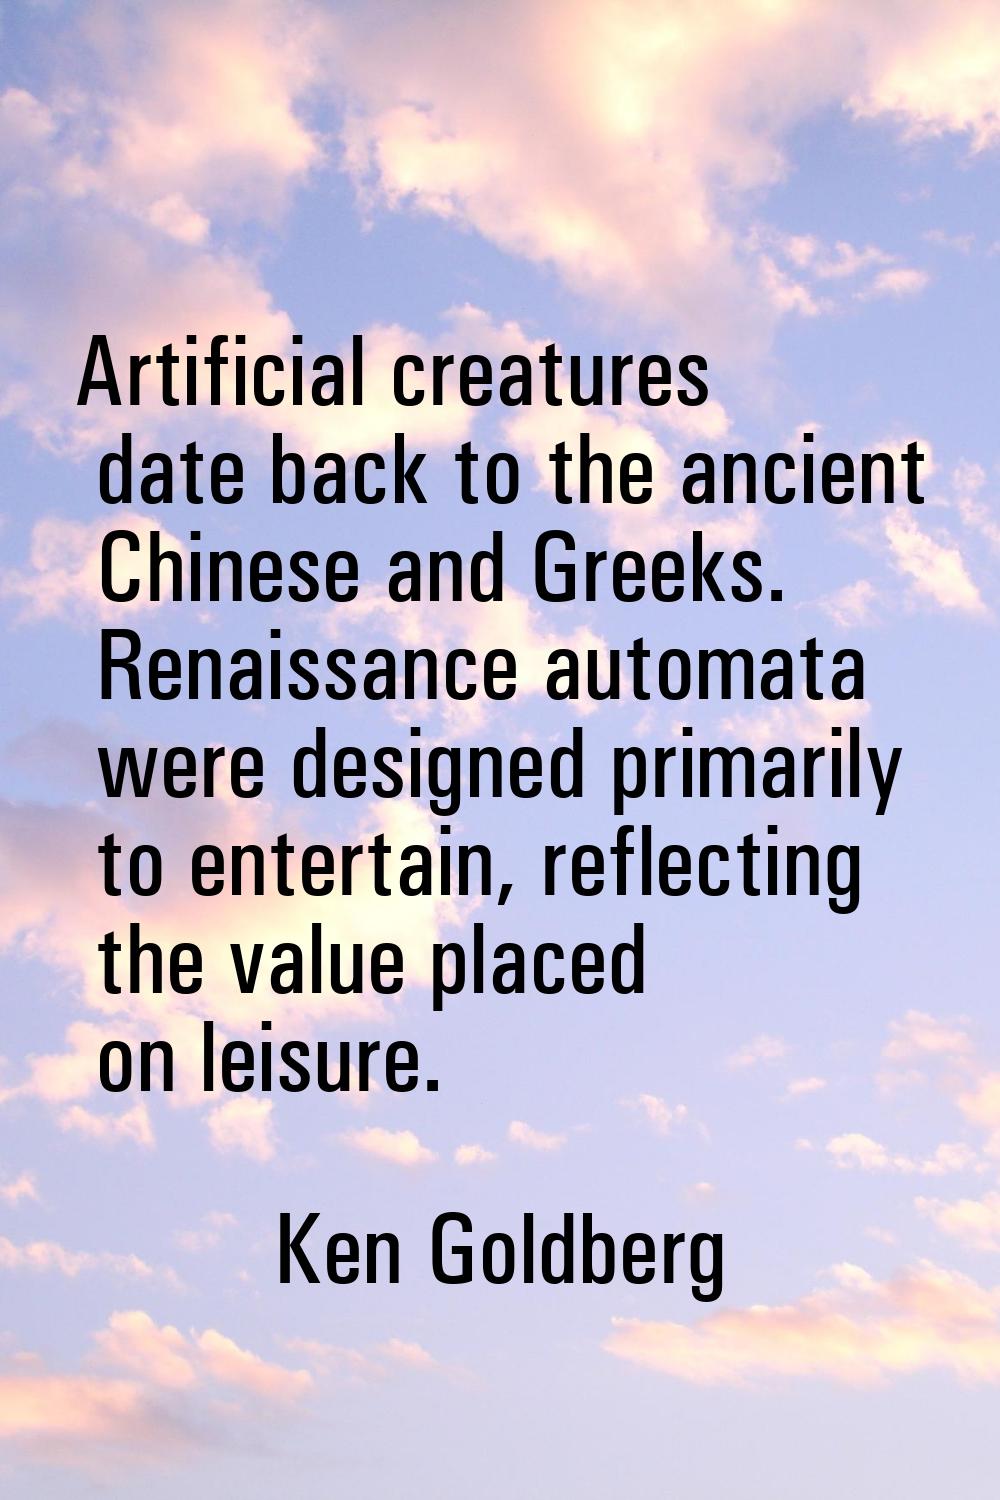 Artificial creatures date back to the ancient Chinese and Greeks. Renaissance automata were designe